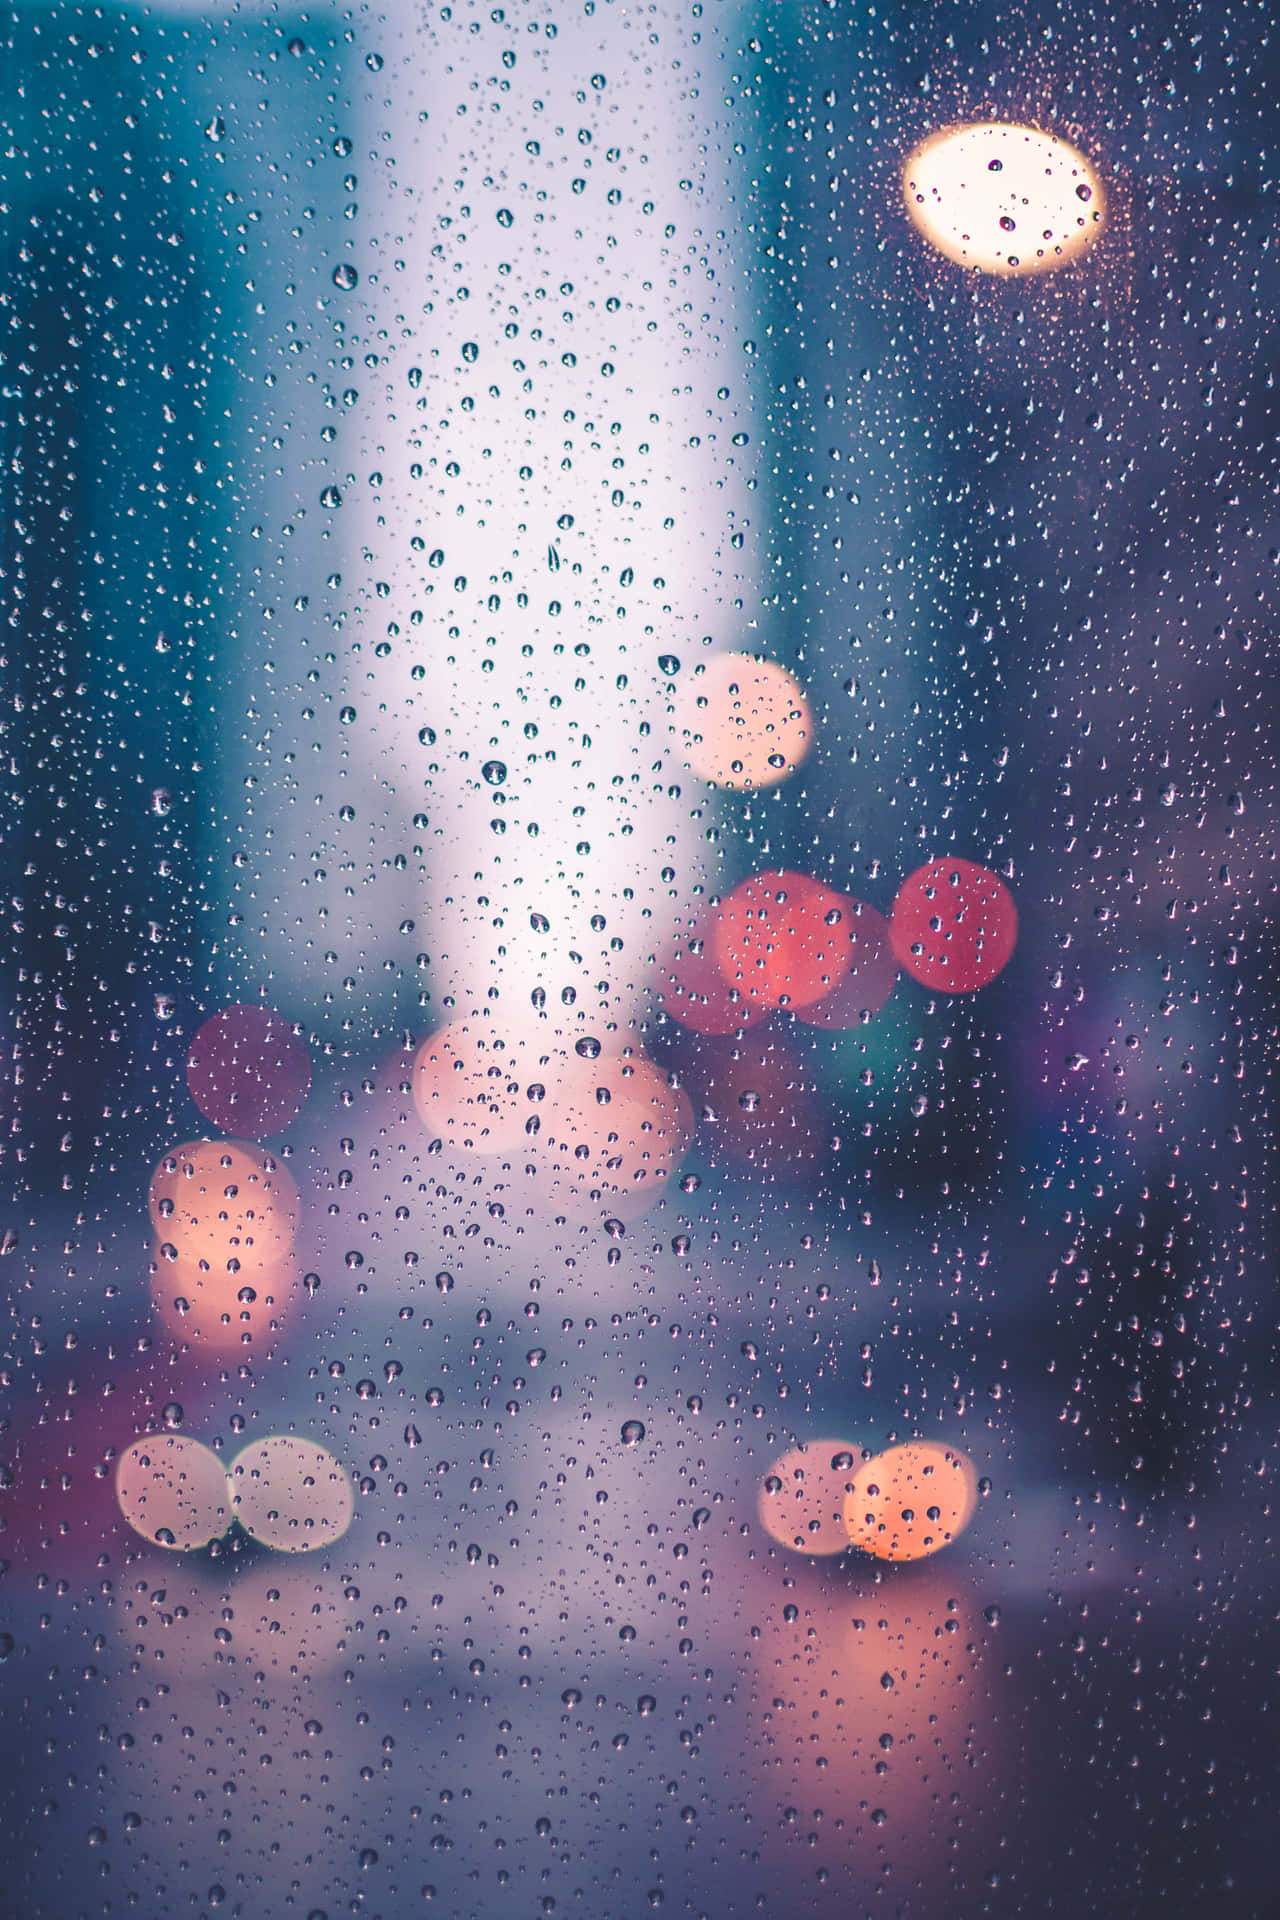 A city bathed in the beauty of the rain. Wallpaper